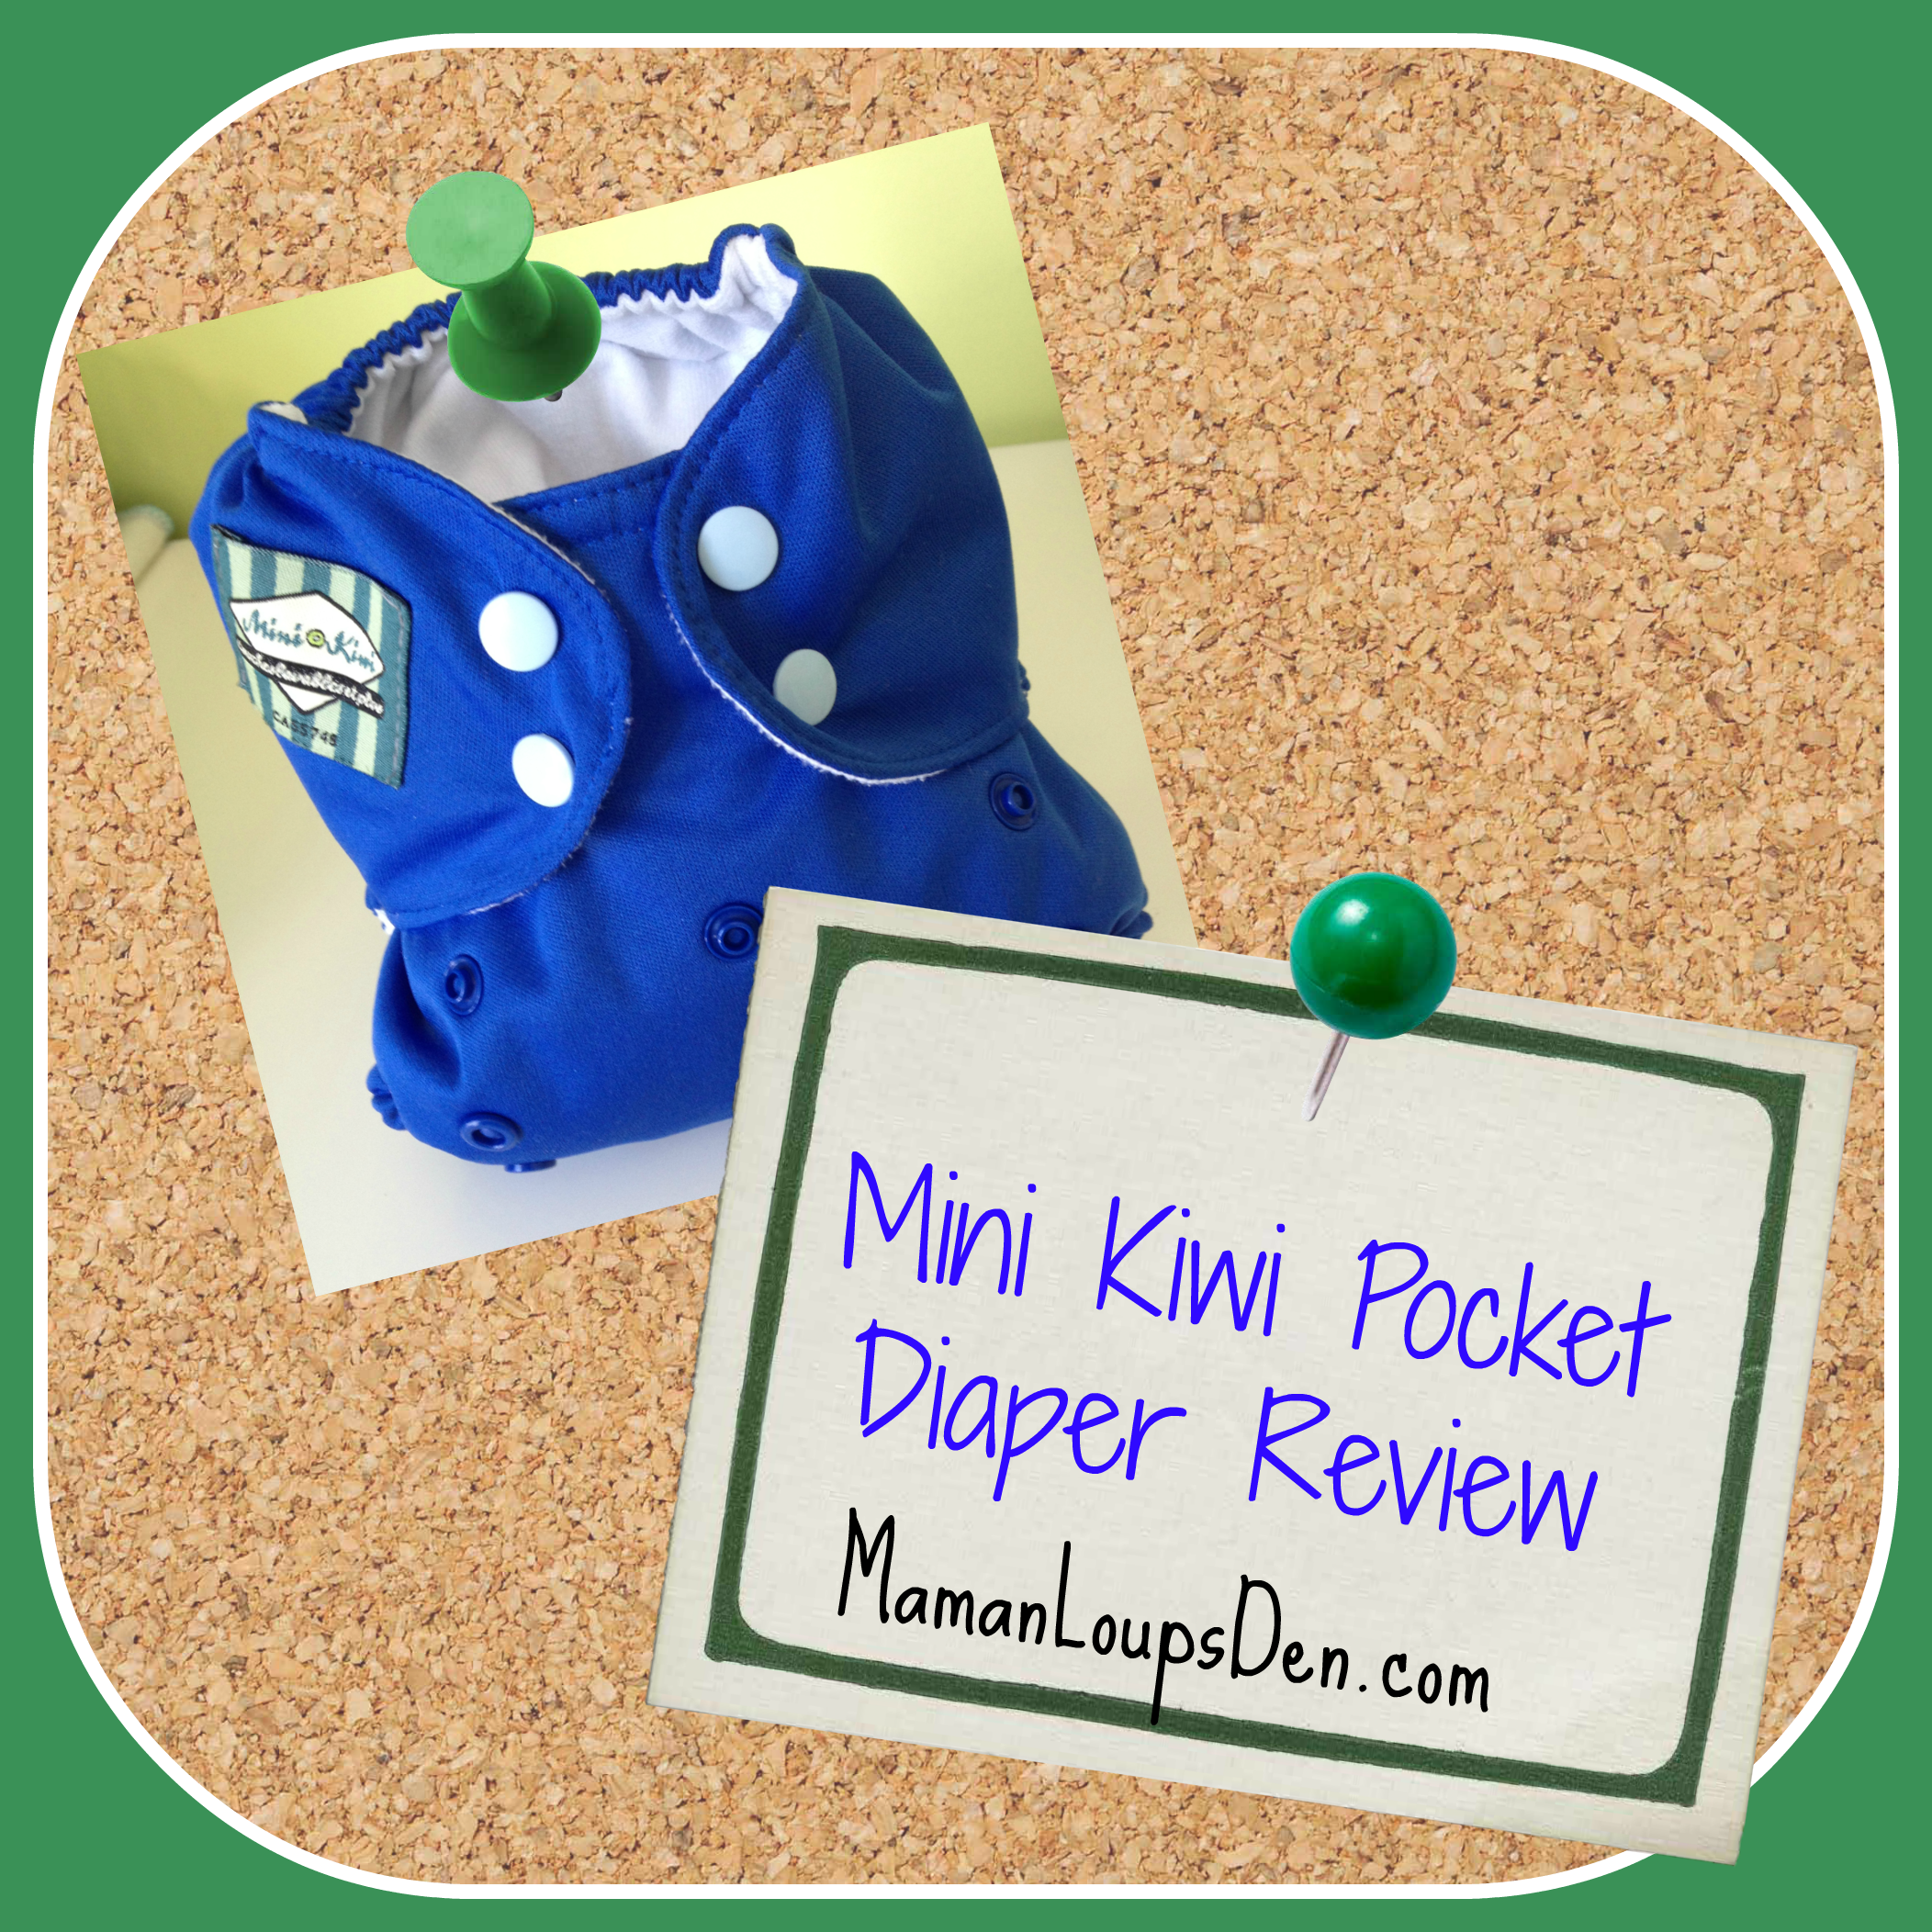 Move Over Poutine: Mini Kiwi Cloth Diapers Are Poised to Take Over Canada!